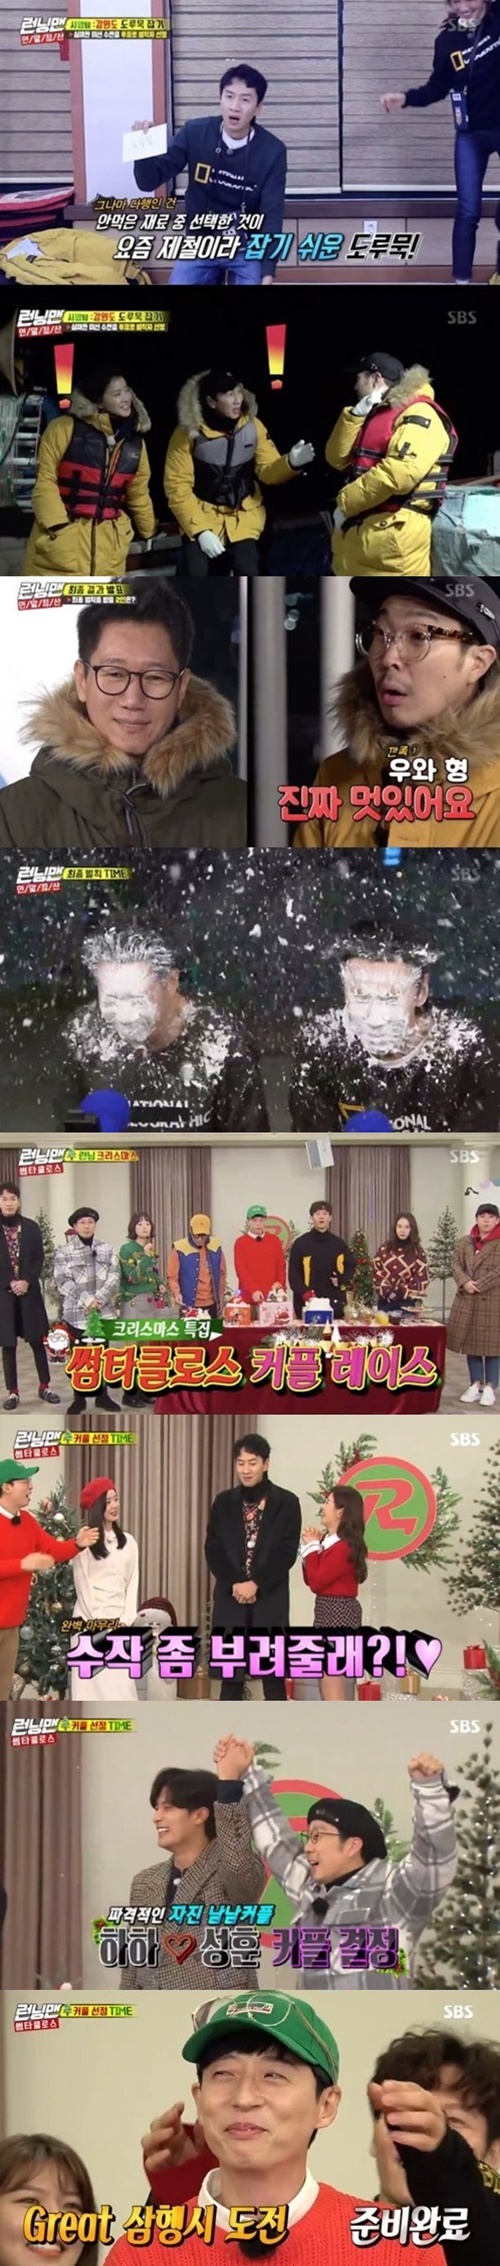 <p>The last 23 days broadcast of ‘Running Man’is a viewership survey Agency Nielsen Korea, according to the Per minute, with a maximum application rate of 8. 4%(the NCR furniture viewership standard)up to climbed to the major advertising officials of the important indicators of ‘2049 target audience’is 4. 1%was recorded.</p><p>This day broadcast on members, and progress was the global mission of ‘failed mission’in play ‘mission year-end settlement: great race’results ‘with size of each Featured Race: Claudia Claus’unfolded.</p><p>Ahead 3 team the mission of the settlement result, these options belong to the management team every successful mission by the penalty box or not, but by voting in a special penalty box. Ago min team ‘side of hell’and falls after the second mission ‘in Hong Kong, Chow Yun-fat and authentication shot’, was a challenge but failed and not necessarily the penalty box and had. This in analysis with this penalty are selected, this light with the punishment received, and the analysis is “we design once and let the”burning revenge, lust....</p><p>‘Chris Thomas Featured Race : Claudia Claus’girl swimming, including Learn night, Han Sunhwa, Jeon Hye-Bin, star Hoon, singer Michael Bublé is the most delightful couples the start of the race. Especially Han Sunhwa is opening early couples selected from Yoo Jae Suk on ‘Samshan humiliation’to you since the situation is reversed-again couple selected to be Samshan, the station needs to down price progress as a laugh, I found myself.</p><p>Members by the legs and the glasses till take off was a polite Yoo Jae Suk is a straight “one : Han Sunhwa, line : Shenhua seeds, why now?, Angry : angry I am!”Called witty Samshan presented and, finally, Han Sunhwa and couples. This scene is Per minute, with a maximum application rate of 8. Up to 4% soars ‘best 1 minute’.</p>